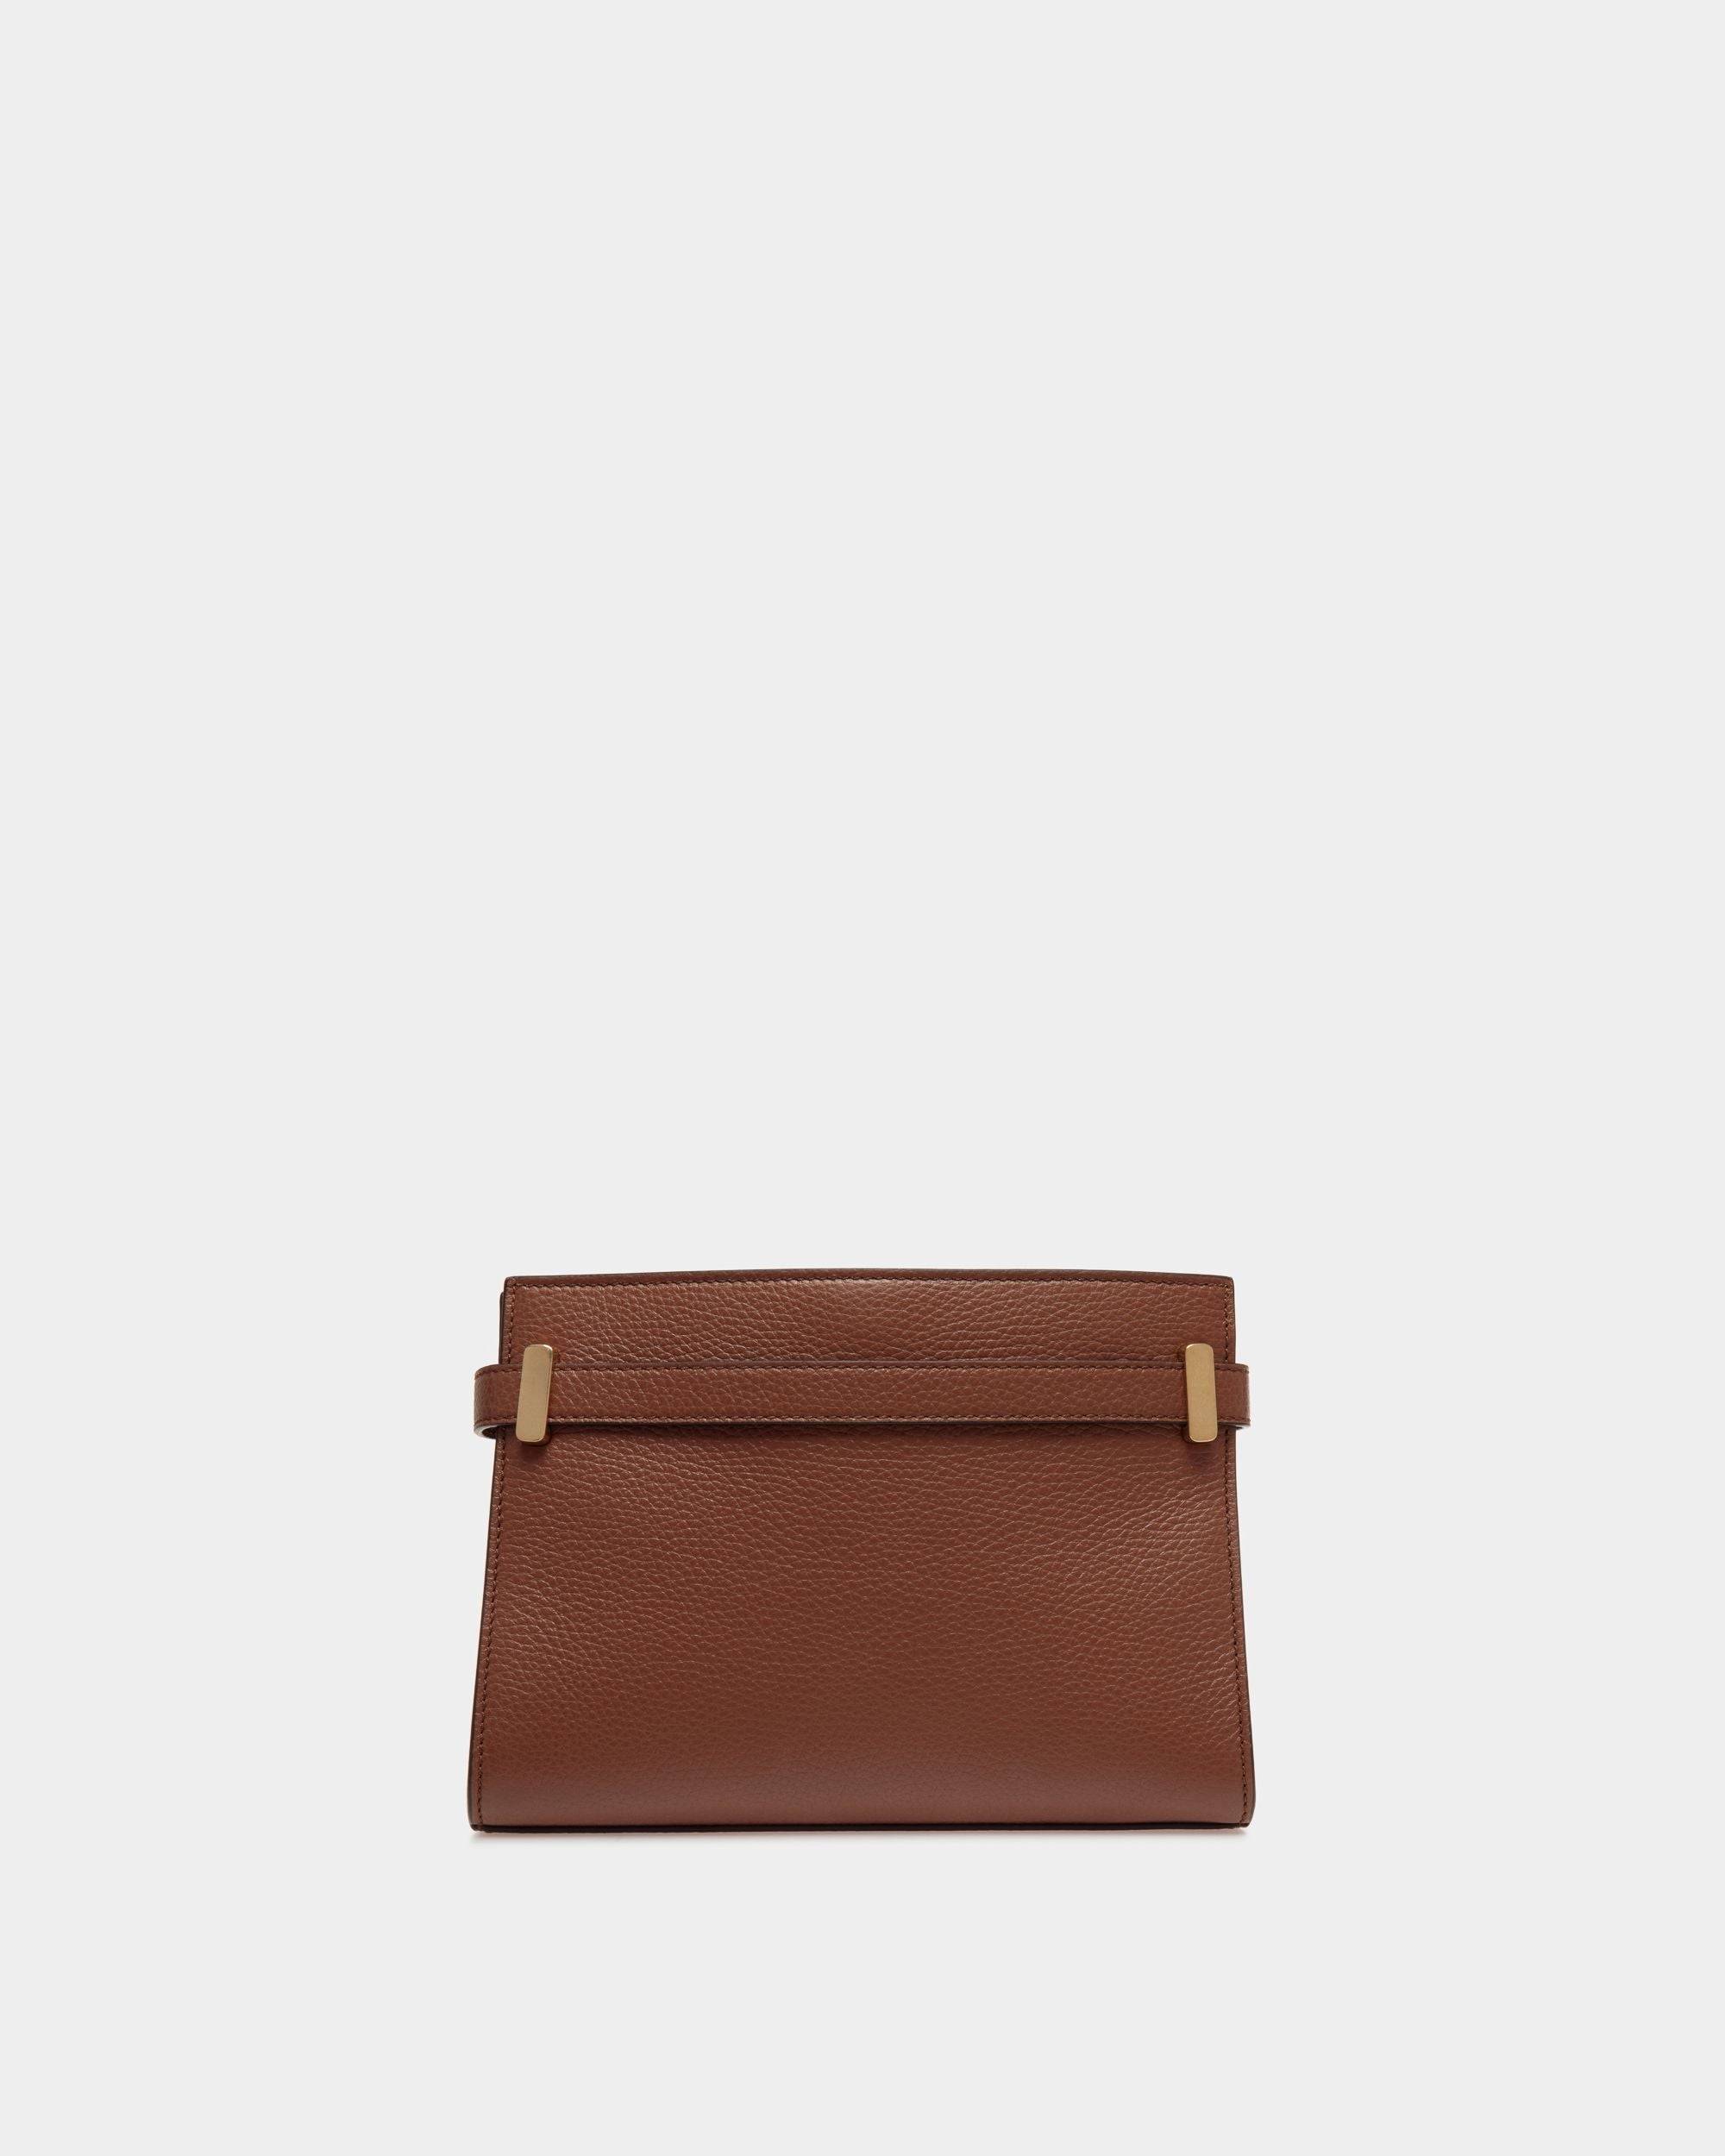 Carriage | Women's Crossbody Bag in Brown Grained Leather | Bally | Still Life Back